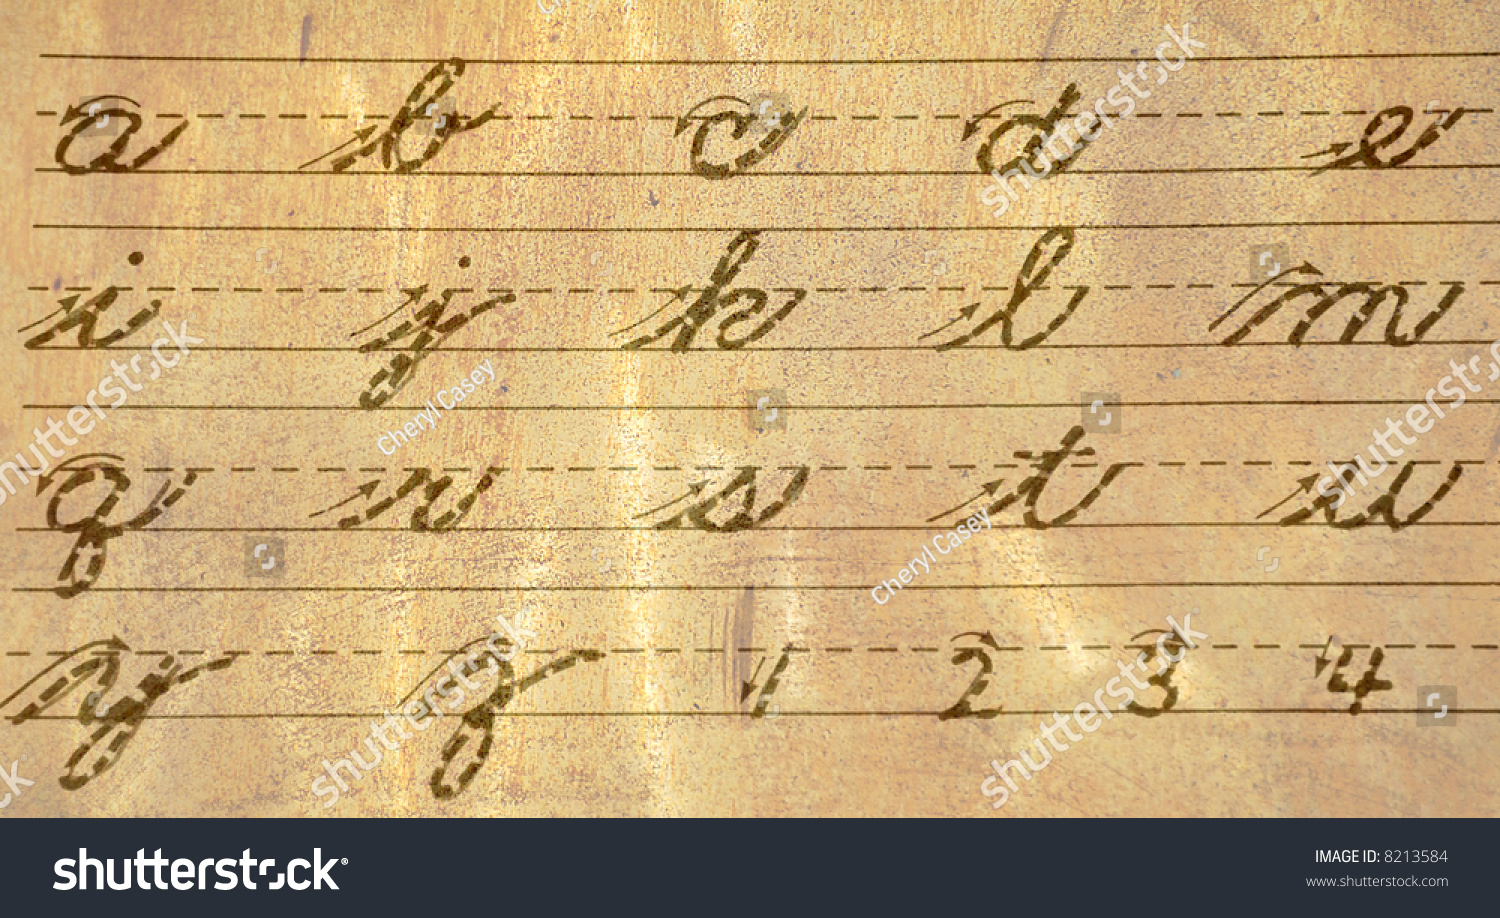 How to write old english text letters